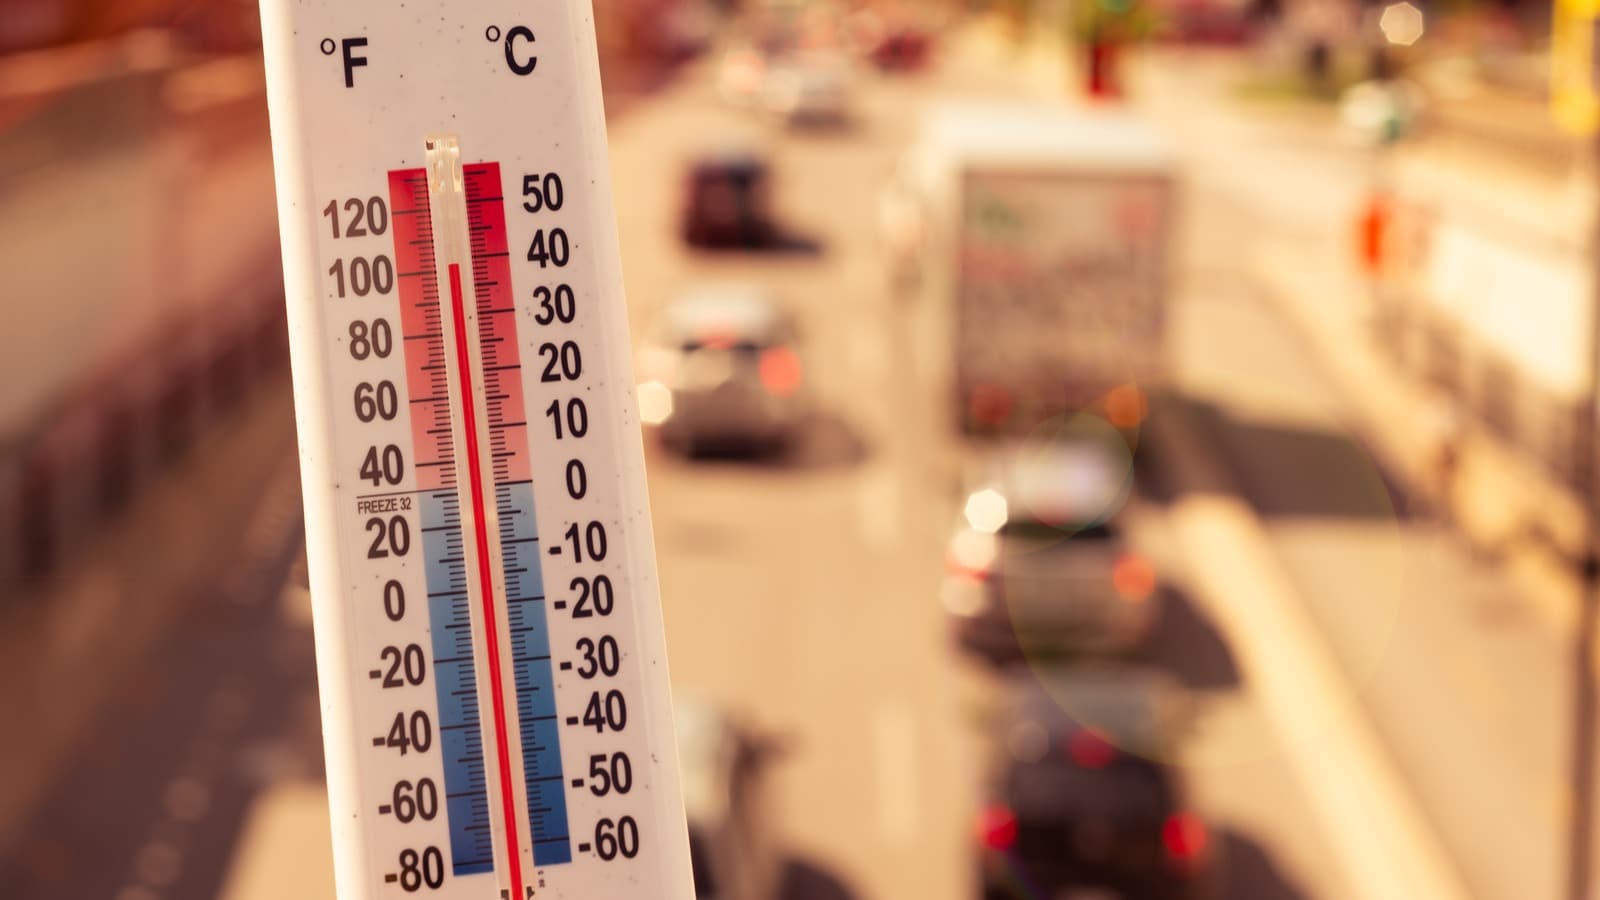 Extreme heat visualized in front of traffic with a thermometer.